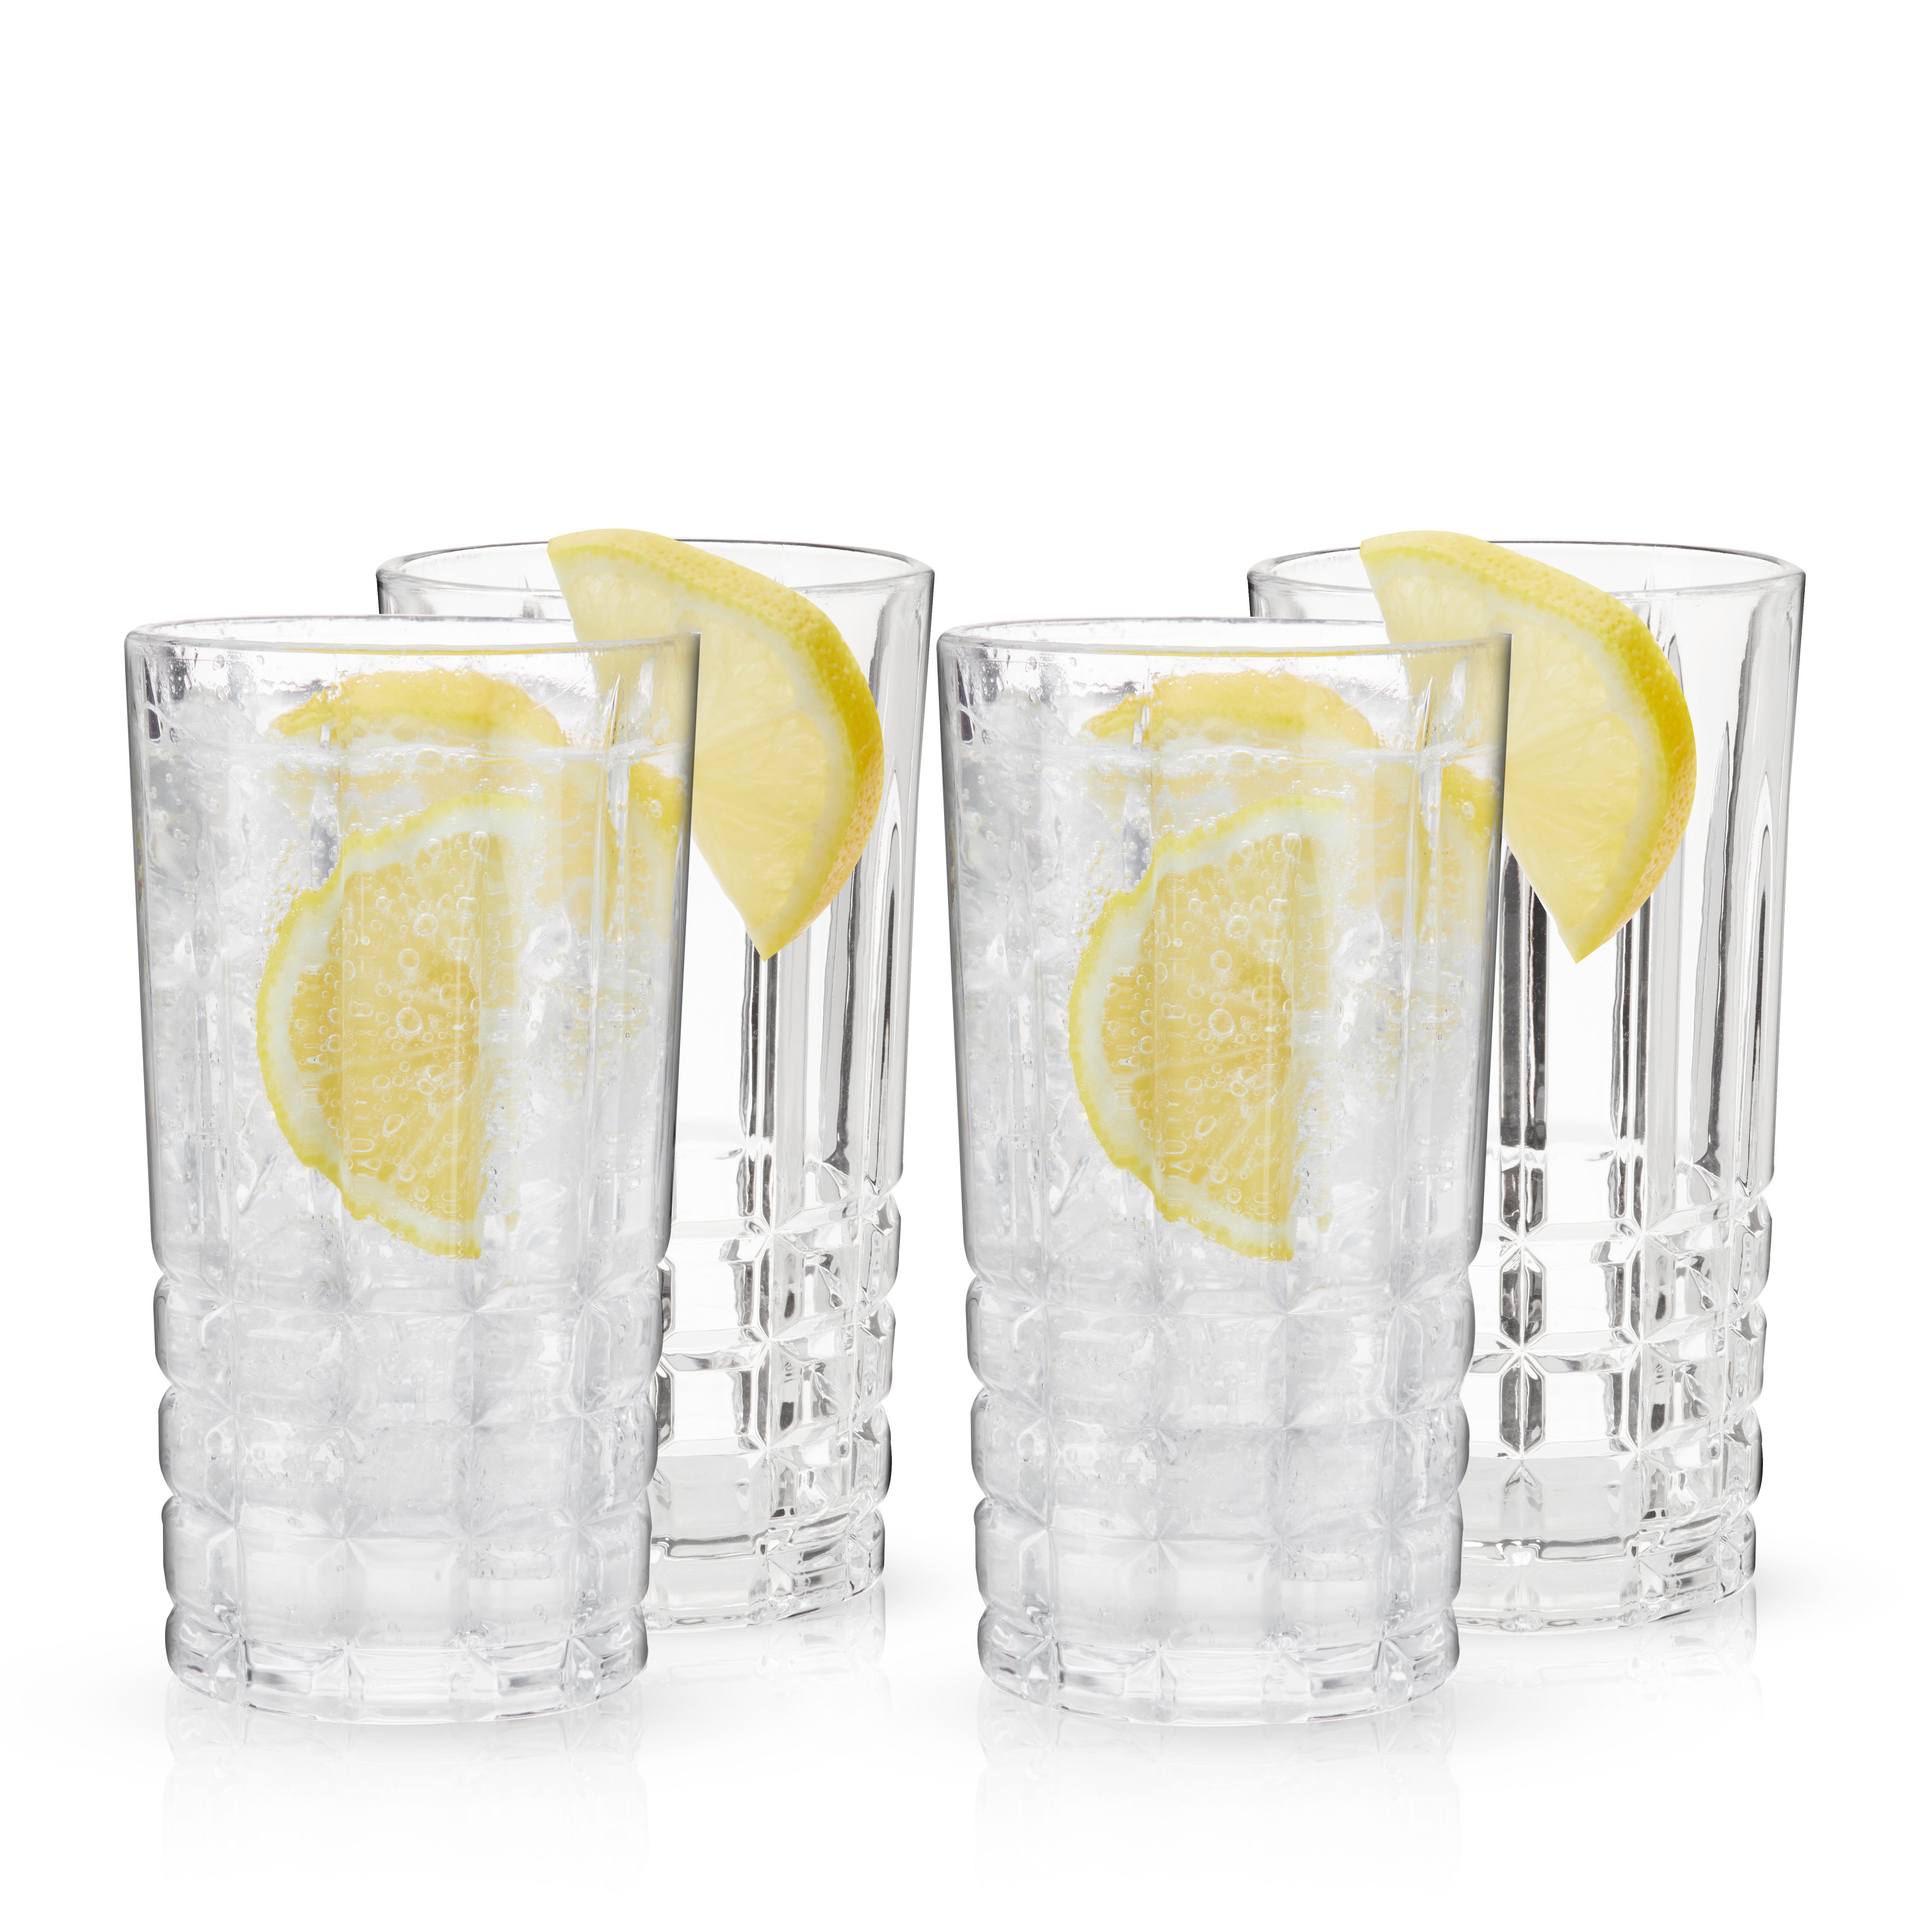 Viski Admiral Crystal Highball Glasses - Fancy Tall Drinking Glass for  Water and Cocktails, Bulk Glassware Gift Set of 12, 9 Oz